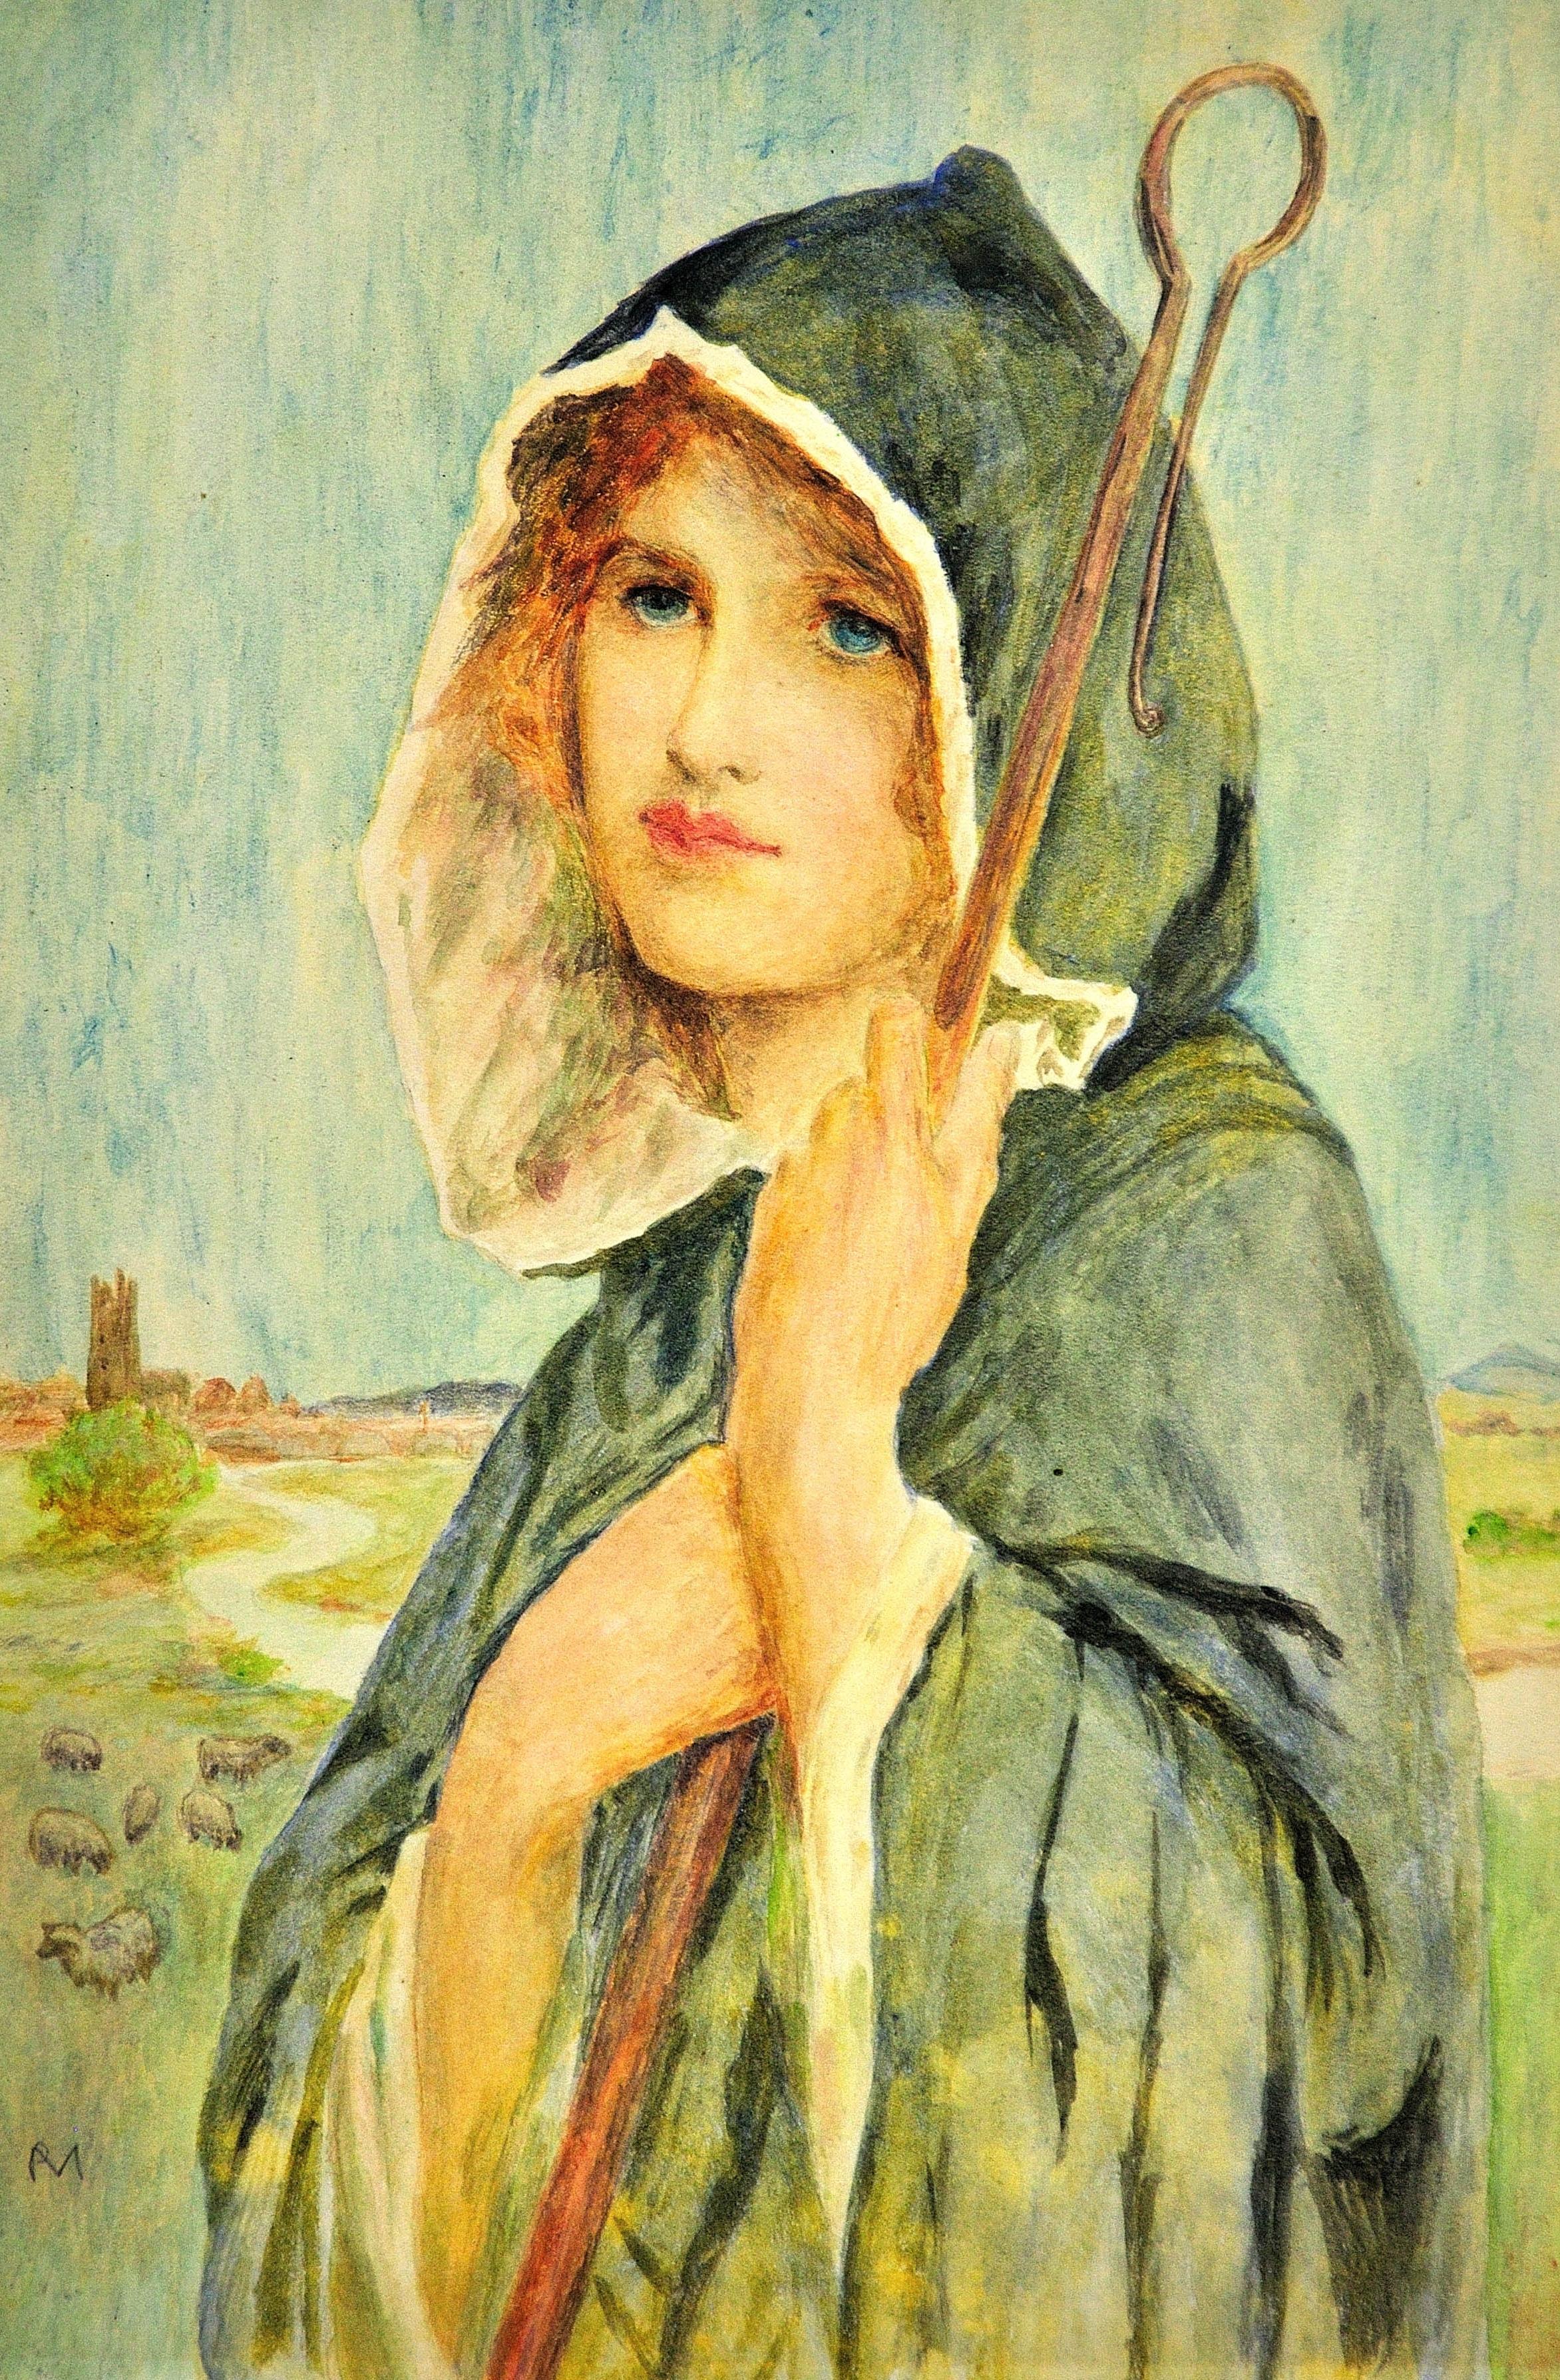 Philip Richard Morris. 
English ( b.1836 - d.1902 ).
The Cloaked Shepherdess.
Watercolor. Signed.
Image size 14 inches x 9.3 inches ( 35.5cm x 23.5cm ).
Frame size 26.3 inches x 20.3 inches ( 67cm x 51.5cm ).

Available for sale; this original